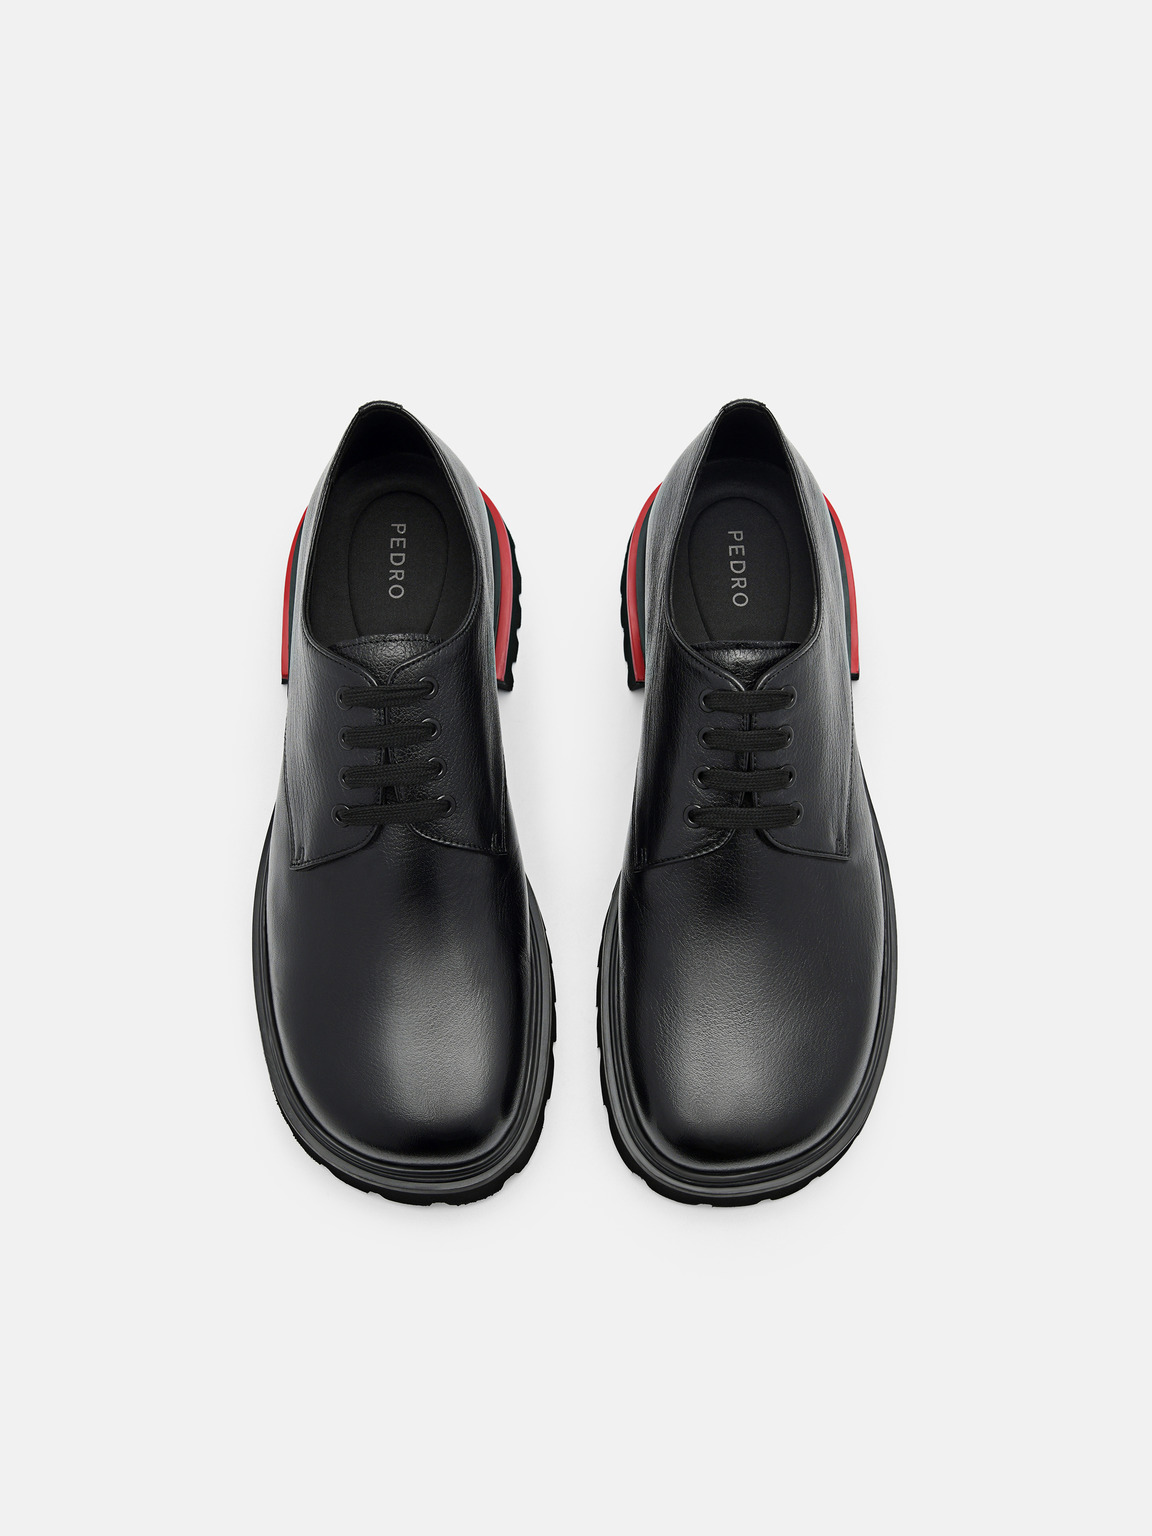 Cooper Leather Derby Shoes, Black2